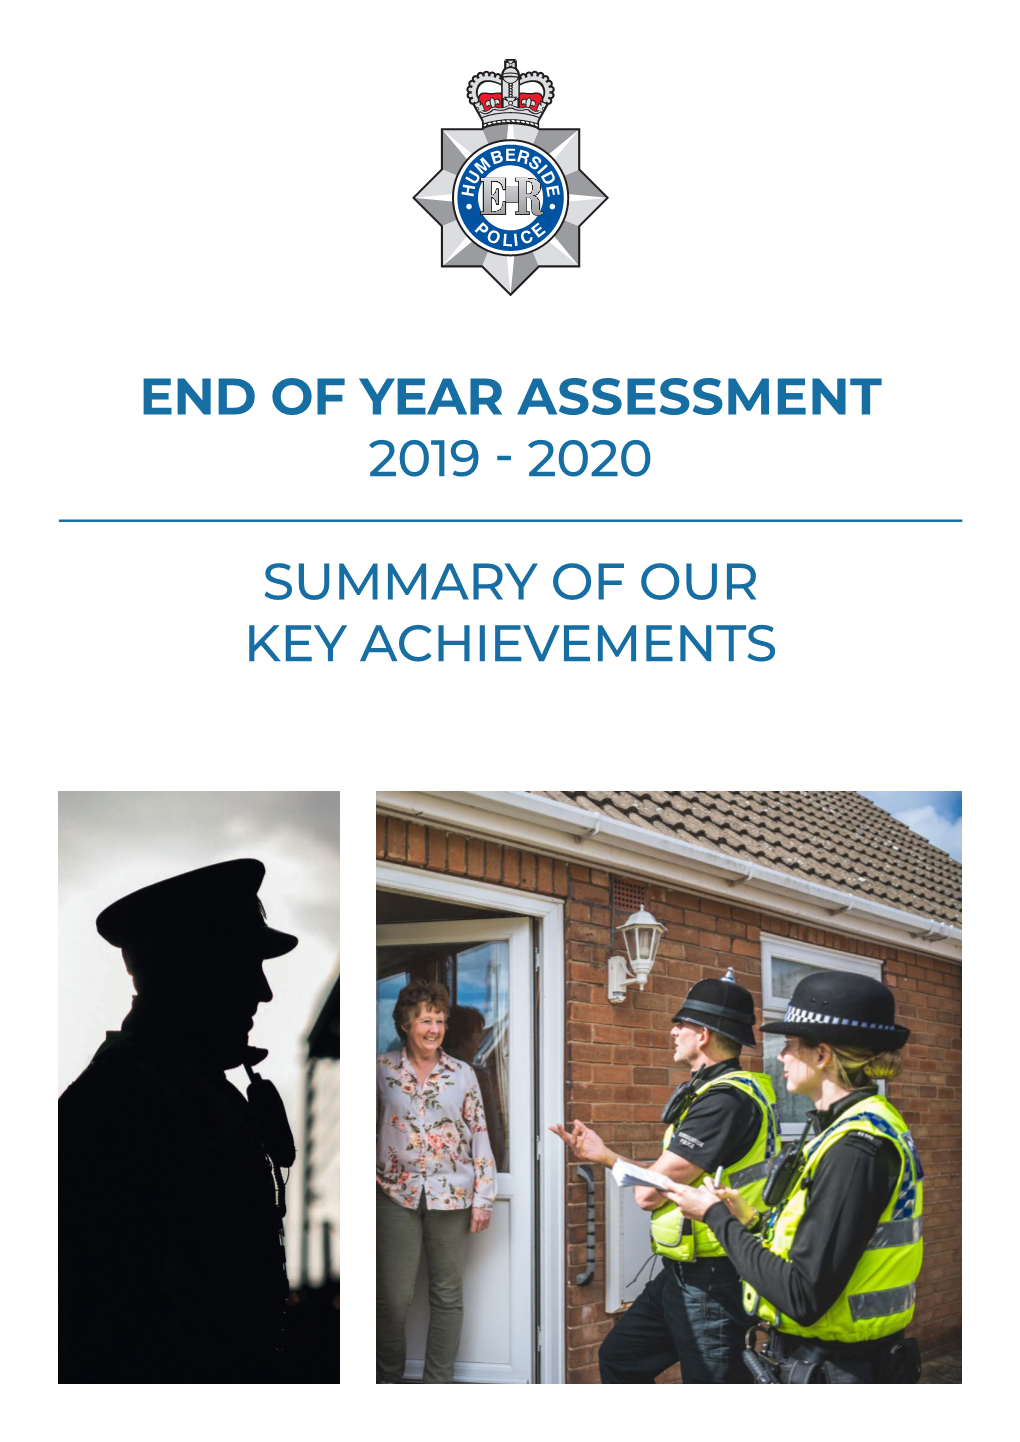 End of Year Assessment 2019 - 2020